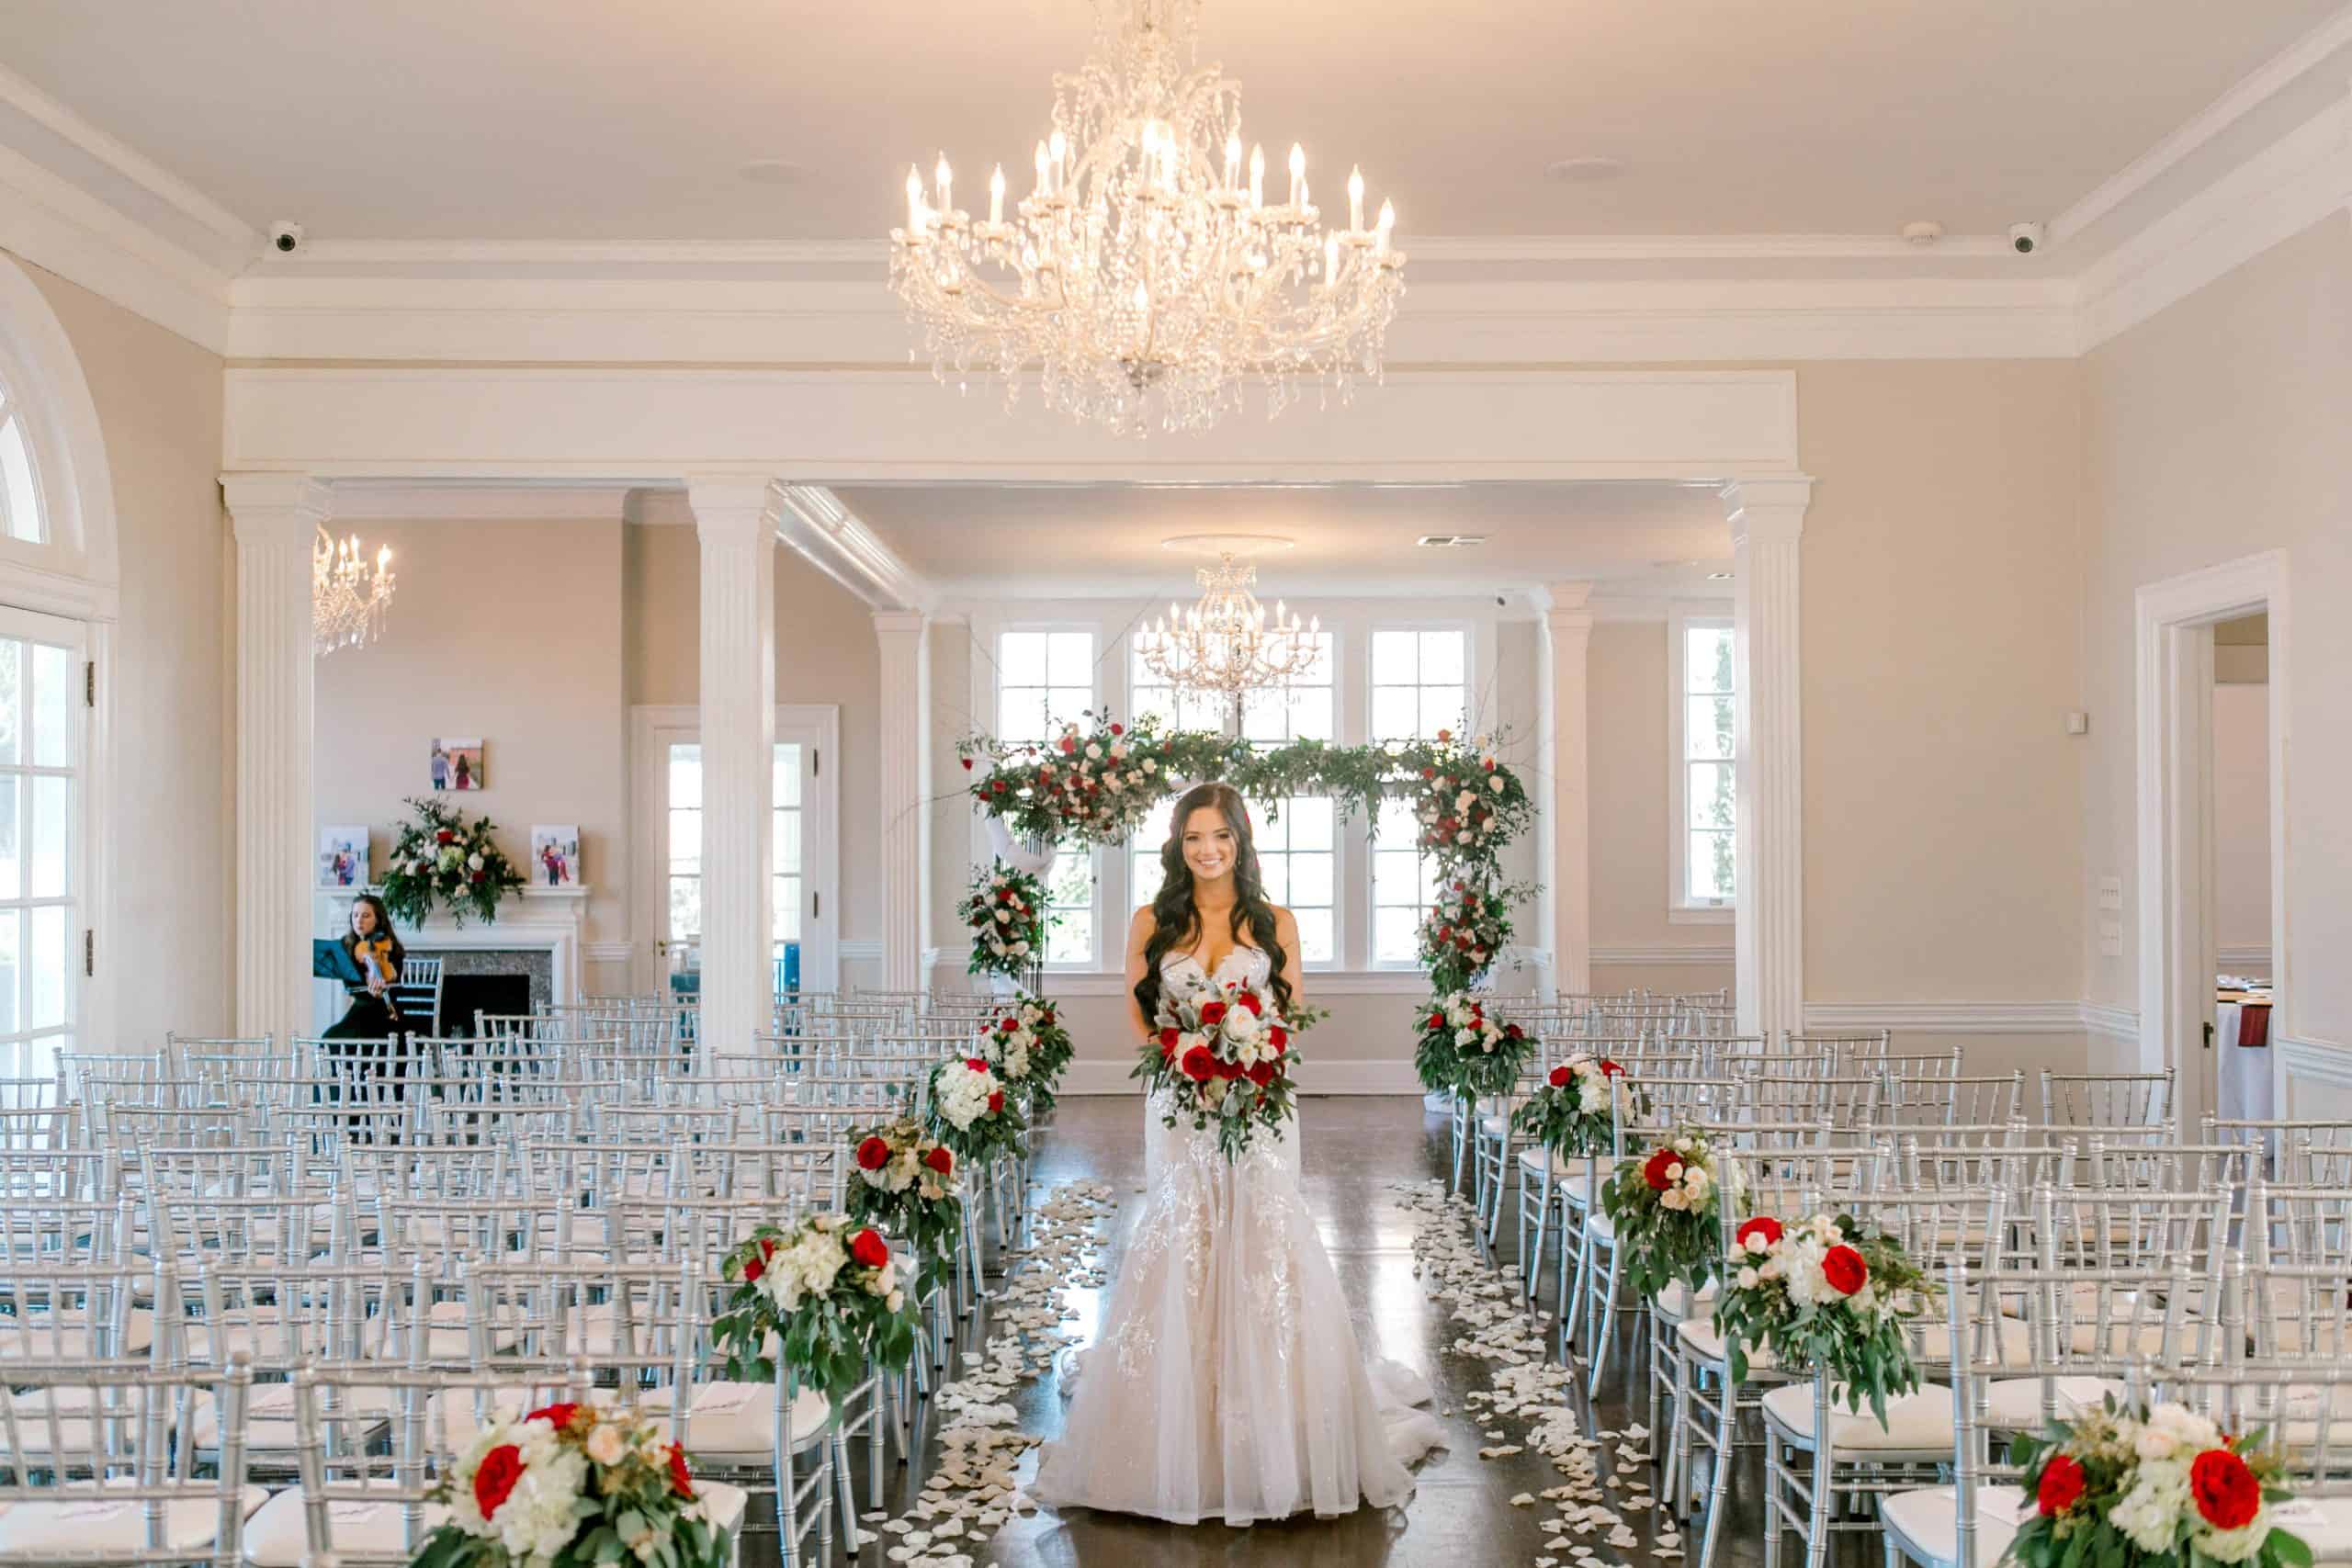 Wedding Venues in Charlotte NC: How to Find the Perfect One